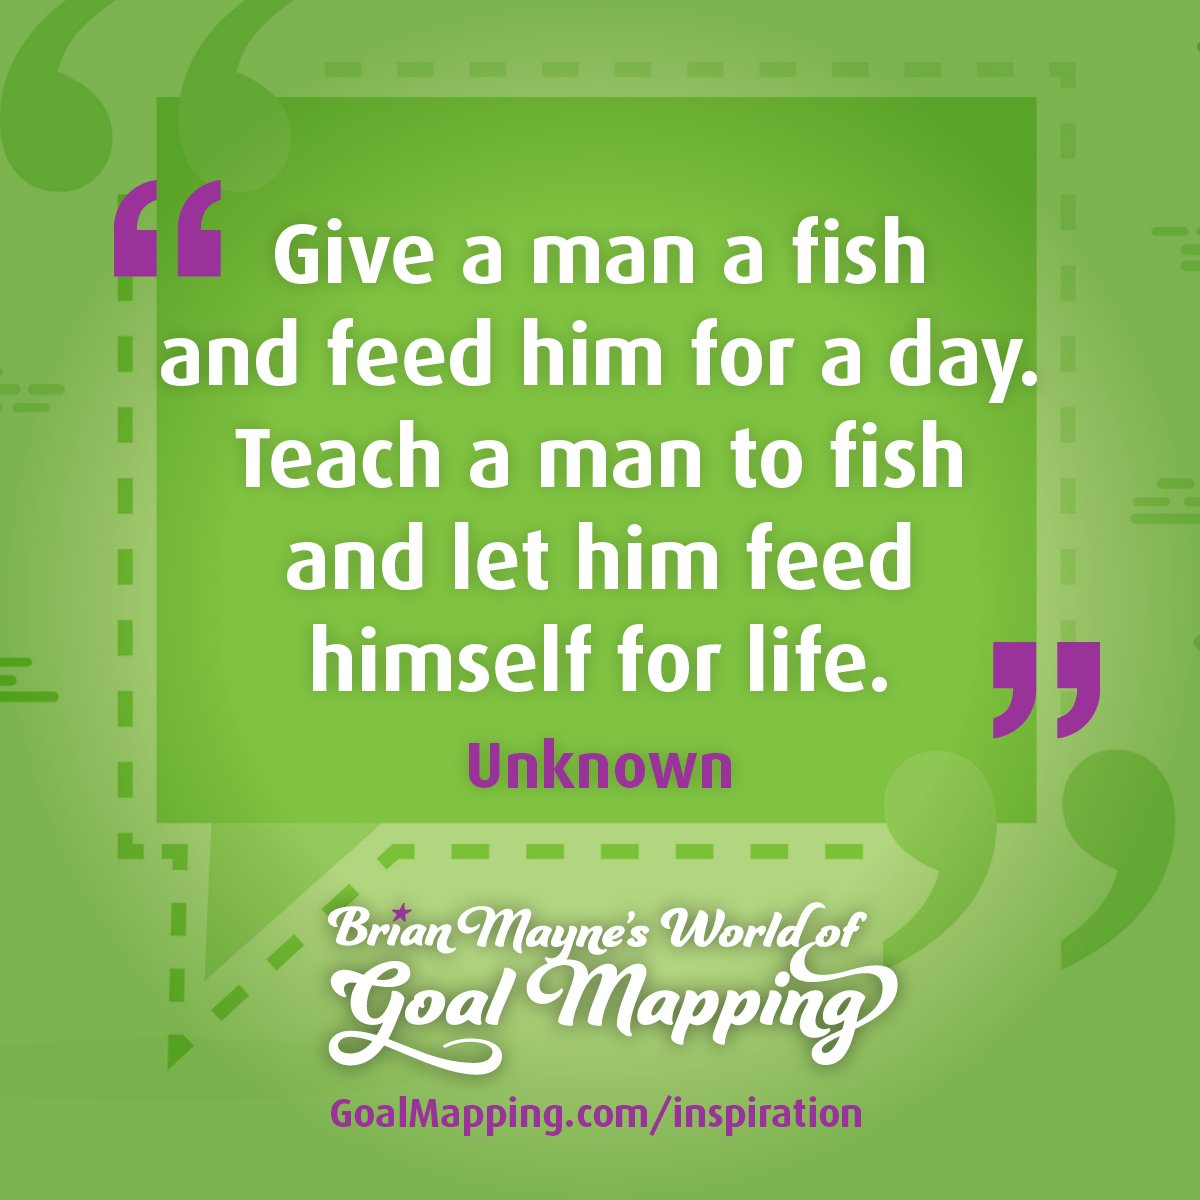 "Give a man a fish and feed him for a day. Teach a man to fish and let him feed himself for life." Unknown